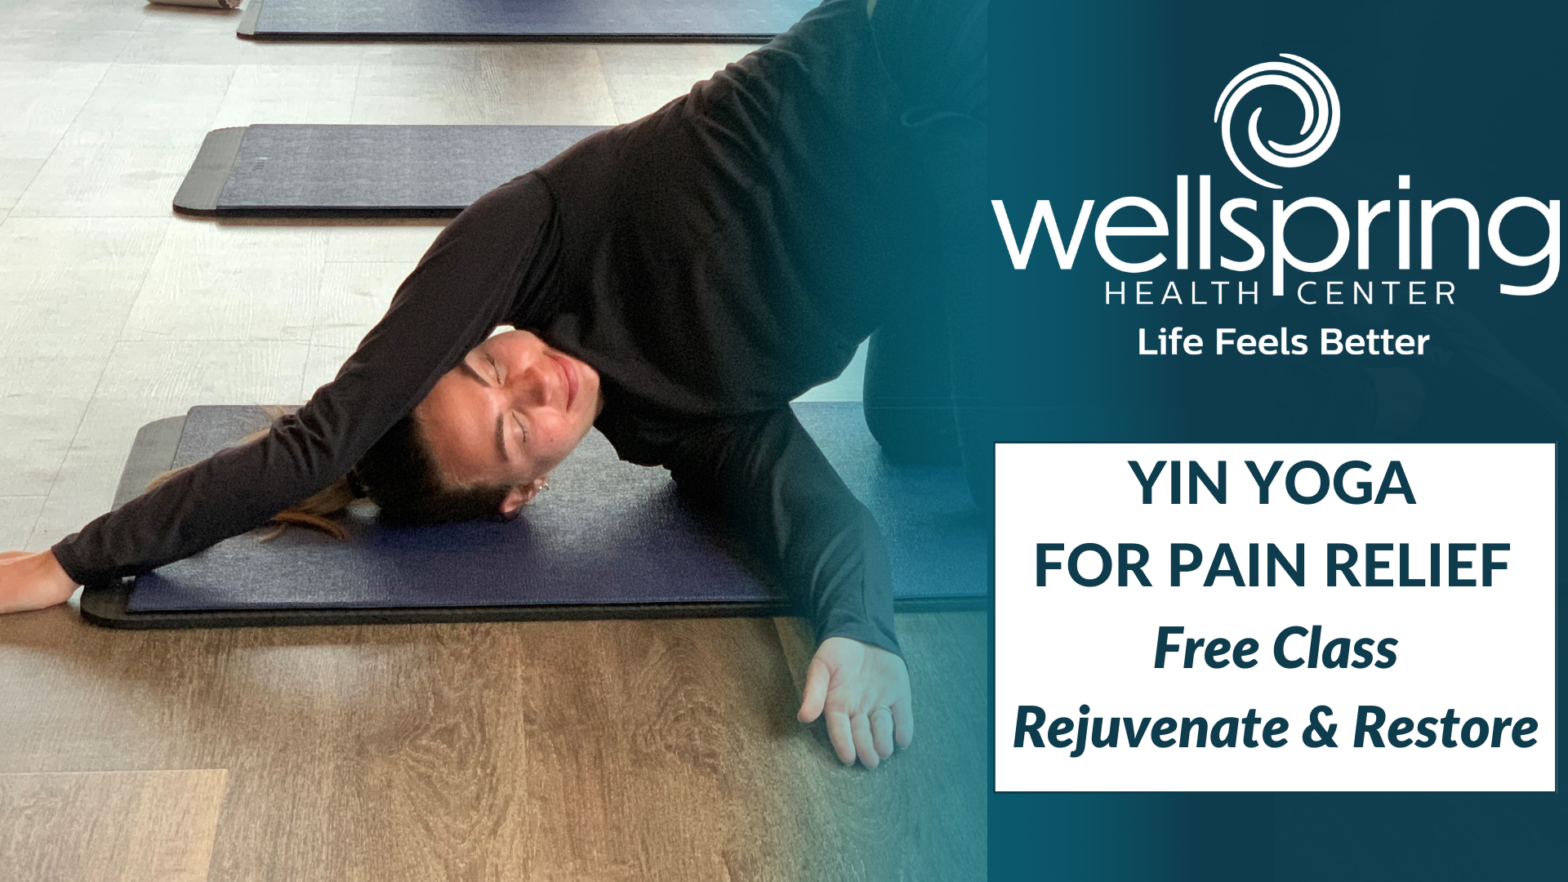 Yin Yoga for Pain Relief